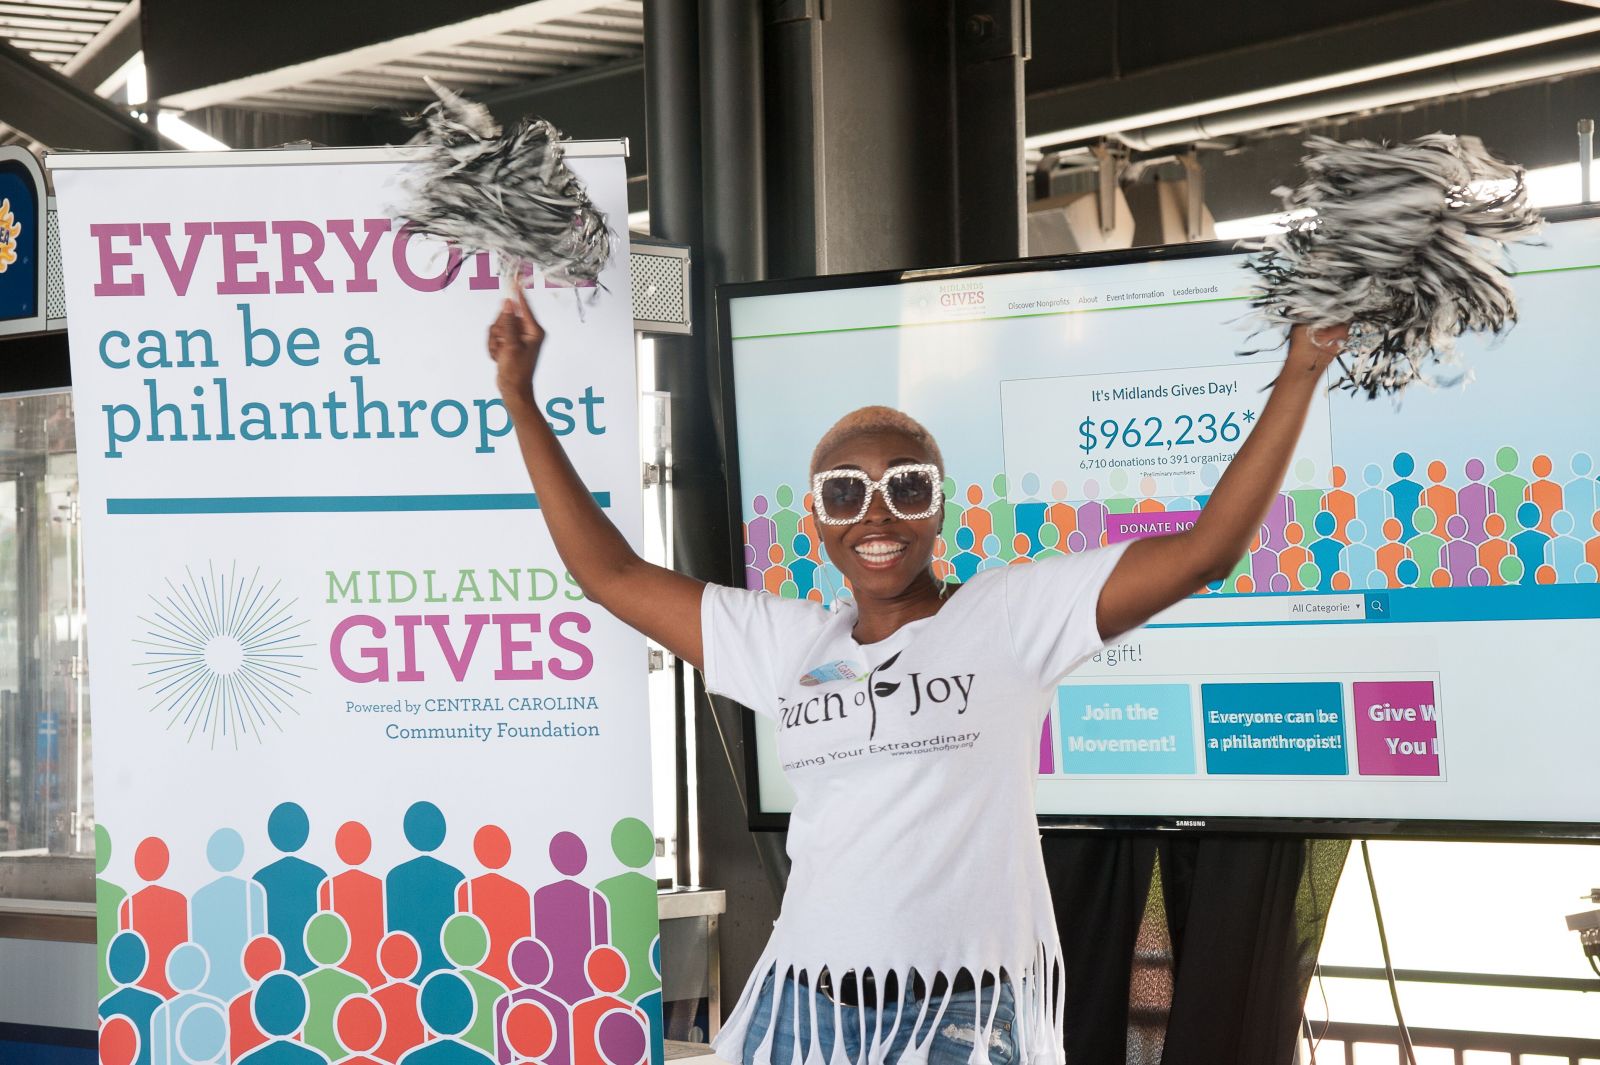 Midlands Gives raised $2.03 million in 2019. That record was broken in 2020 with more than $3.32 million in donations to area charities. (Photo/Mary Grant)